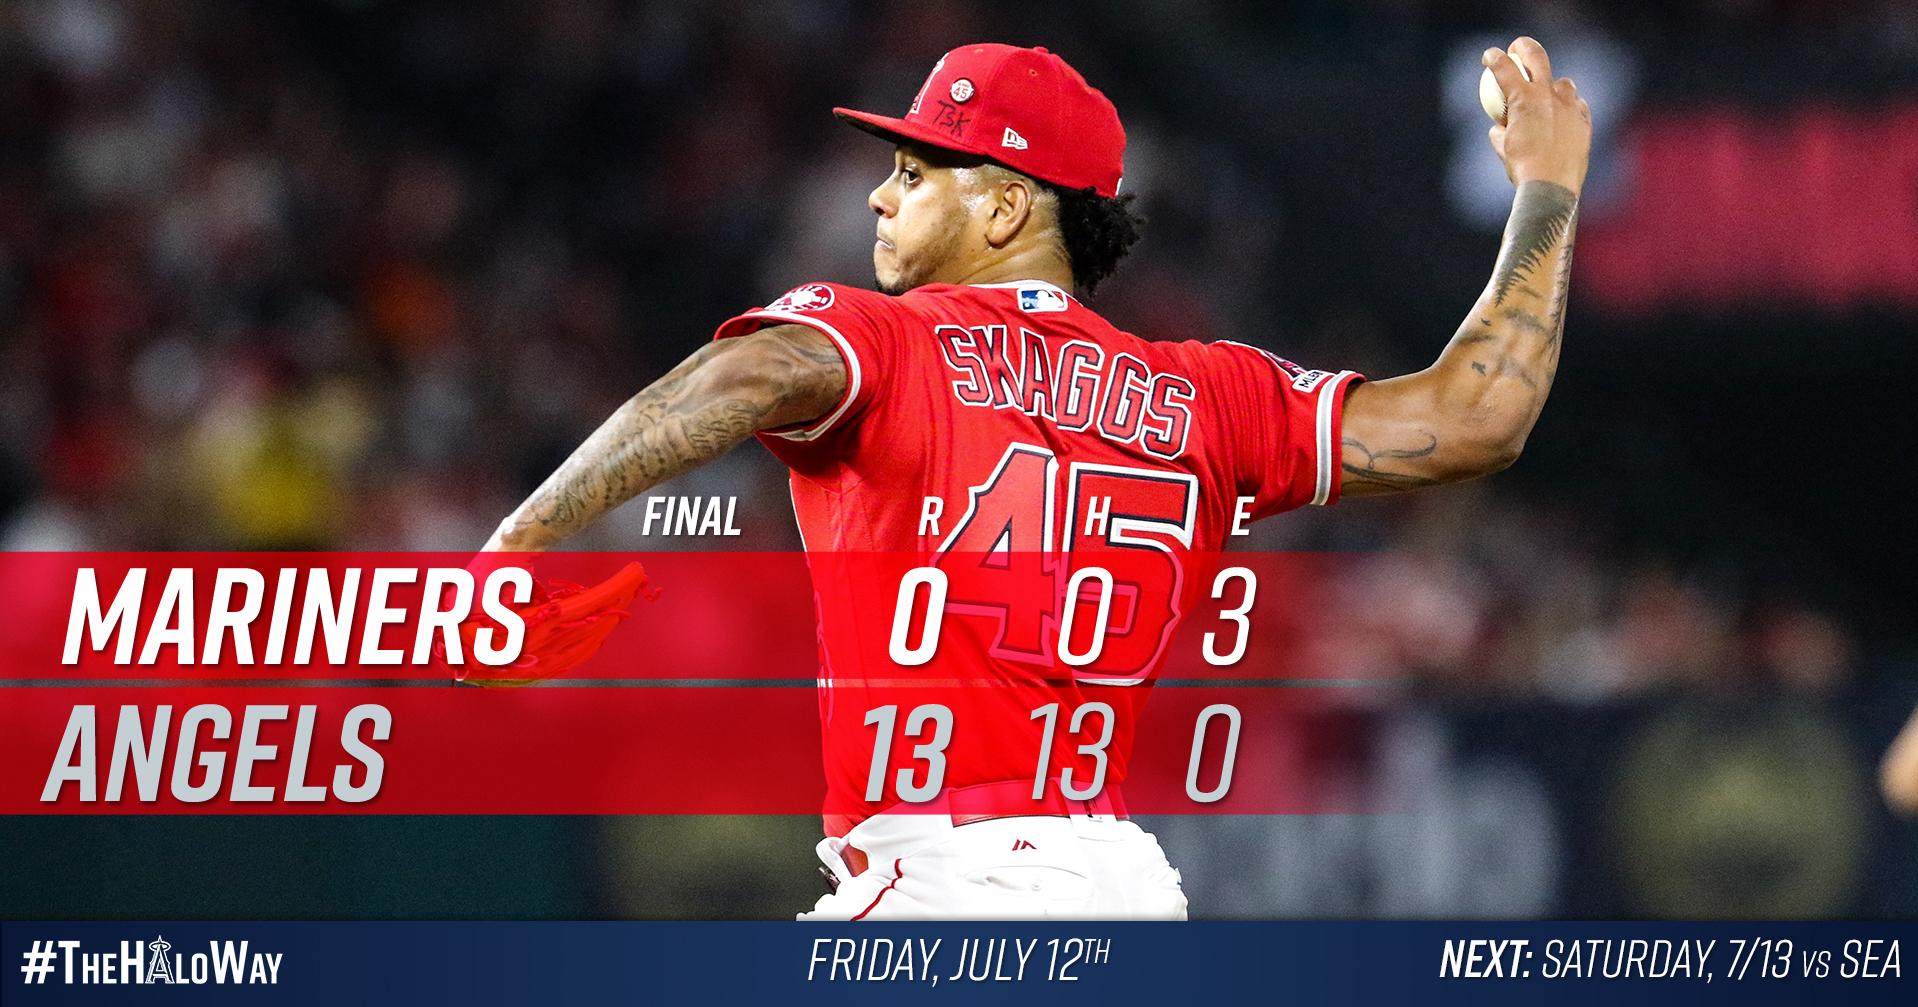 Angels pitchers combine for no-hitter on night honoring Tyler